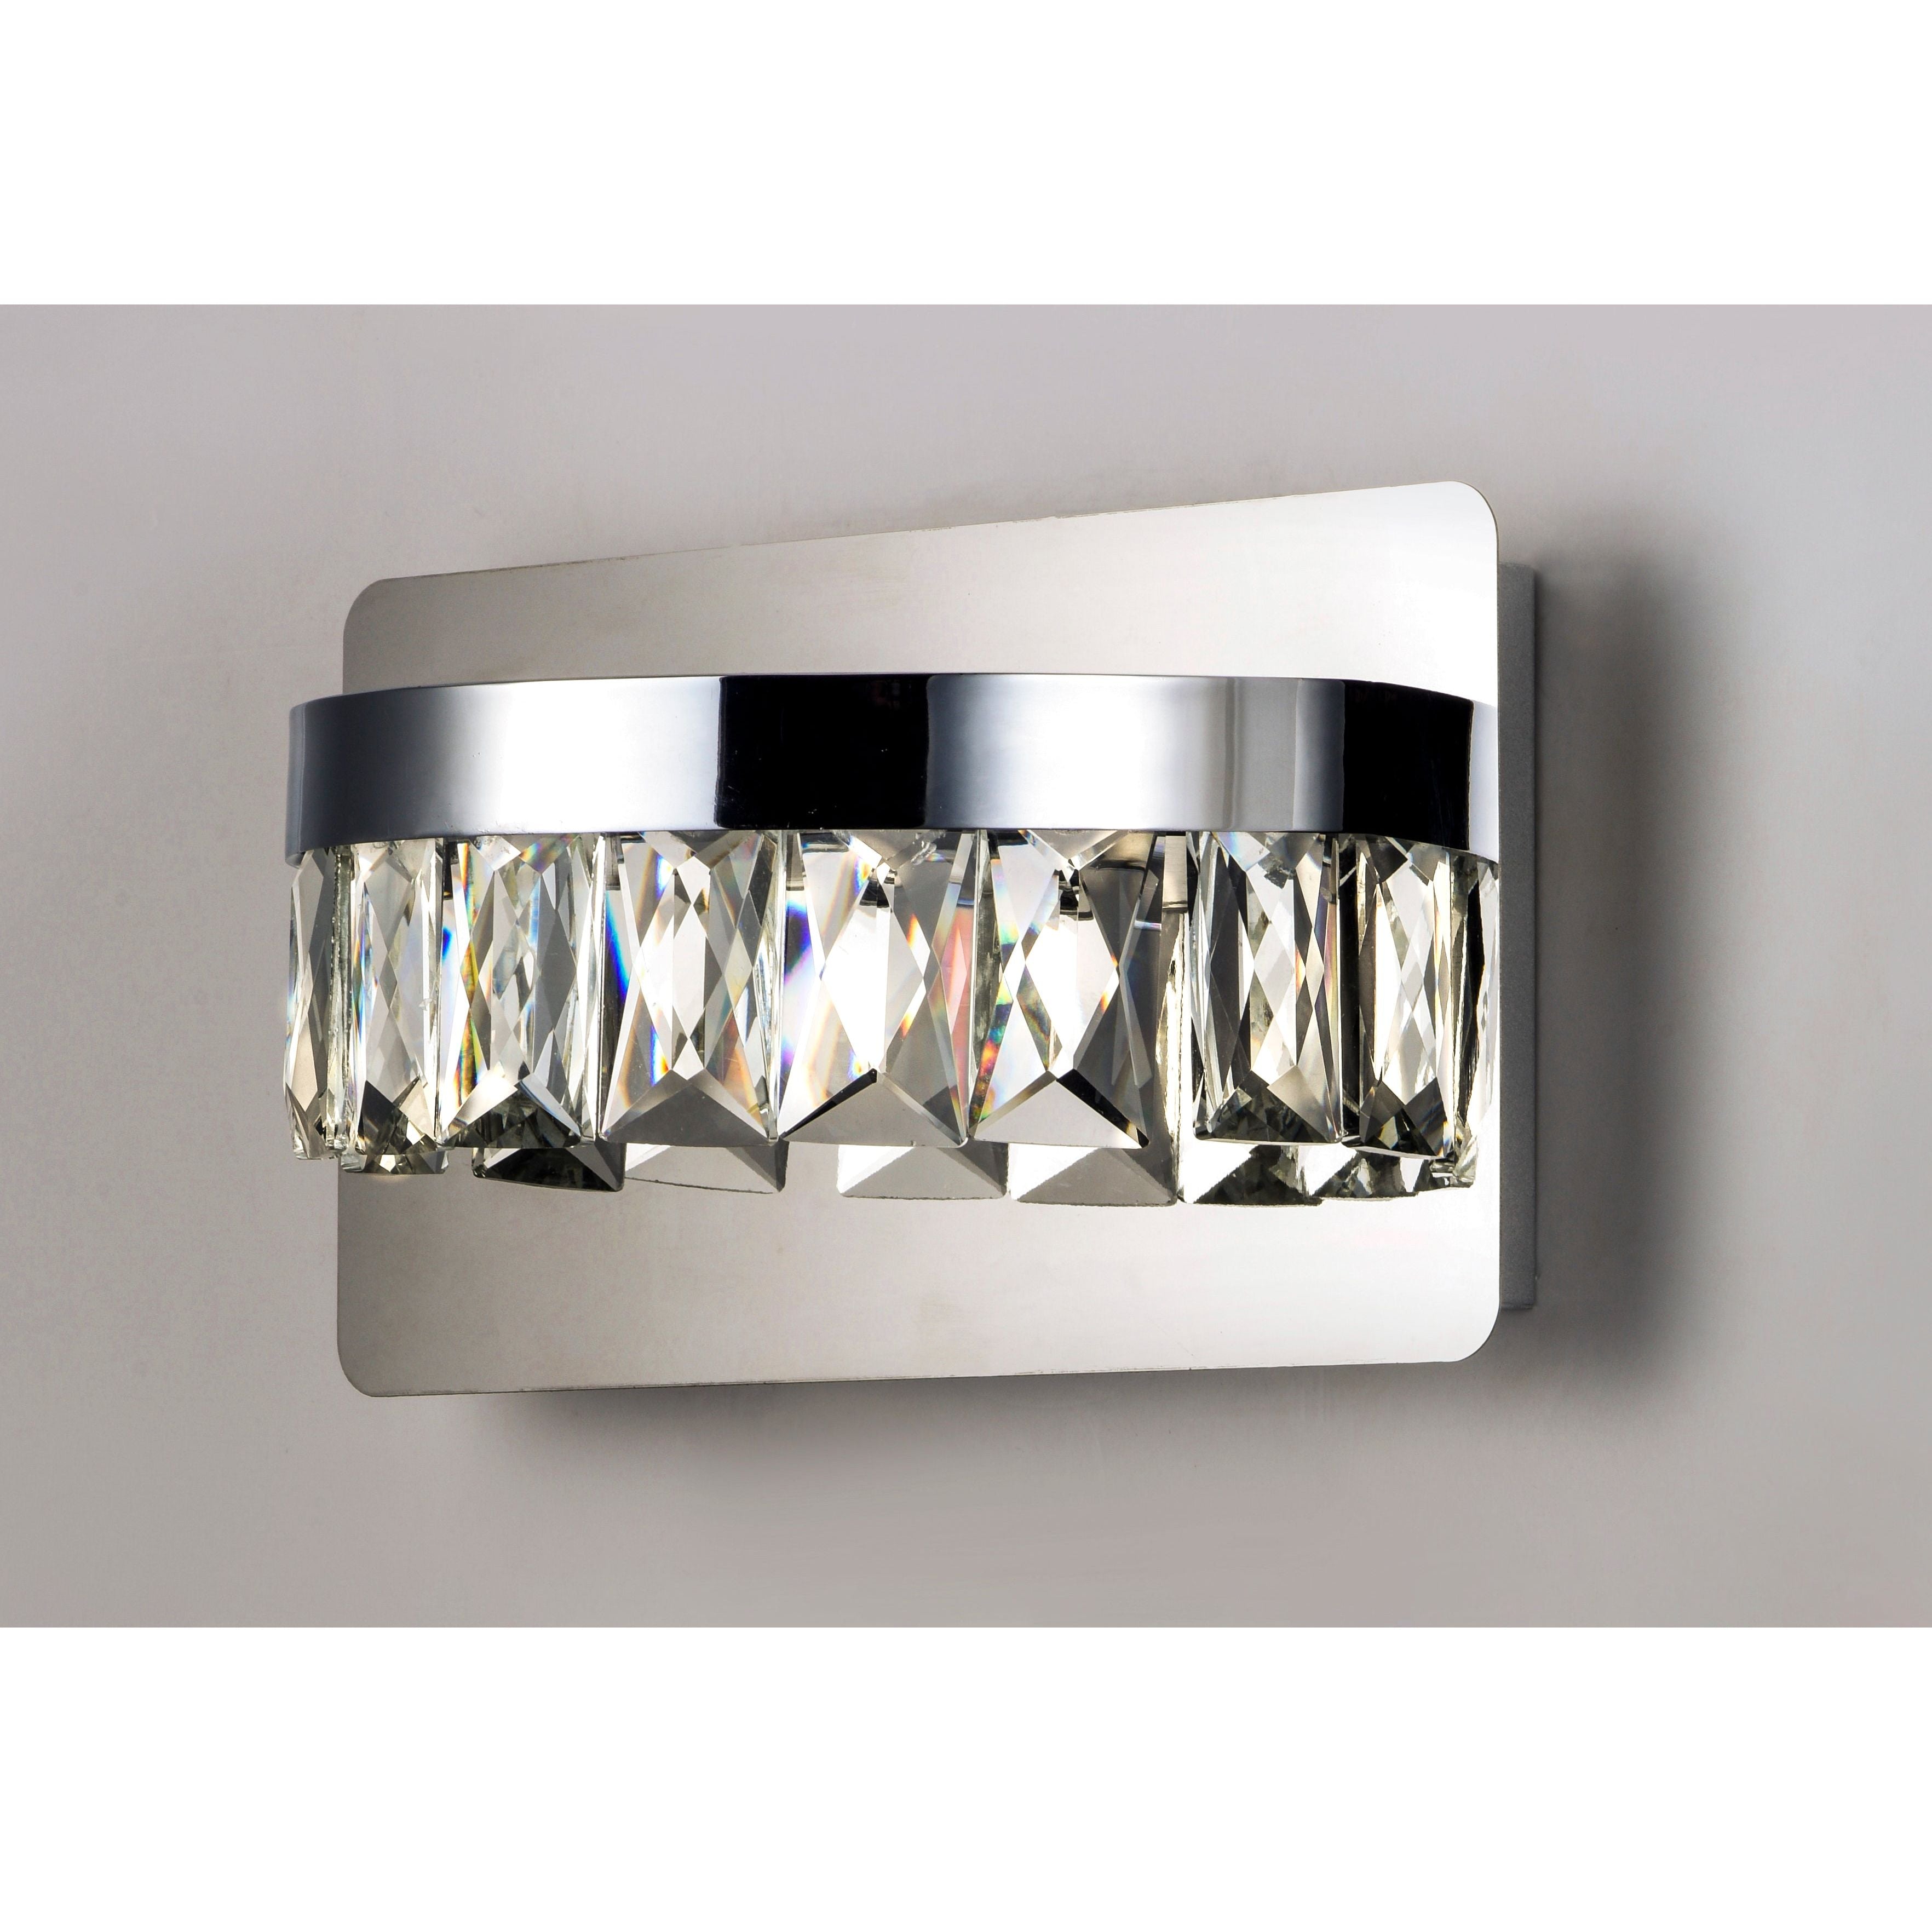 Icycle LED Wall Sconce